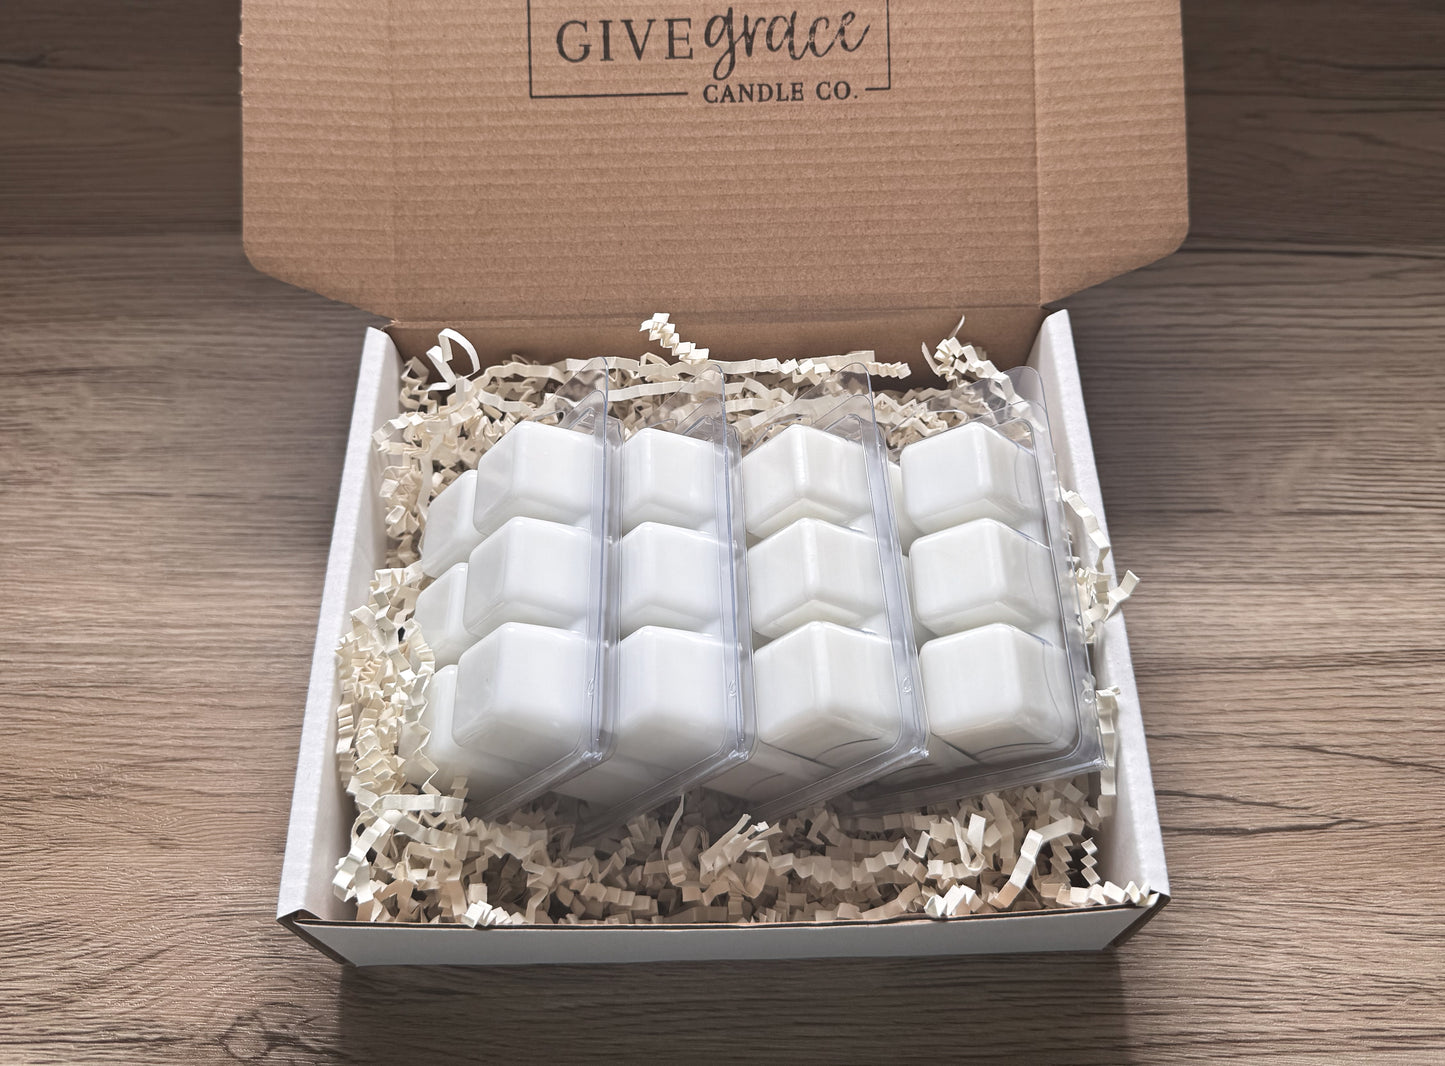 Monthly Wax Melt Subscription Box